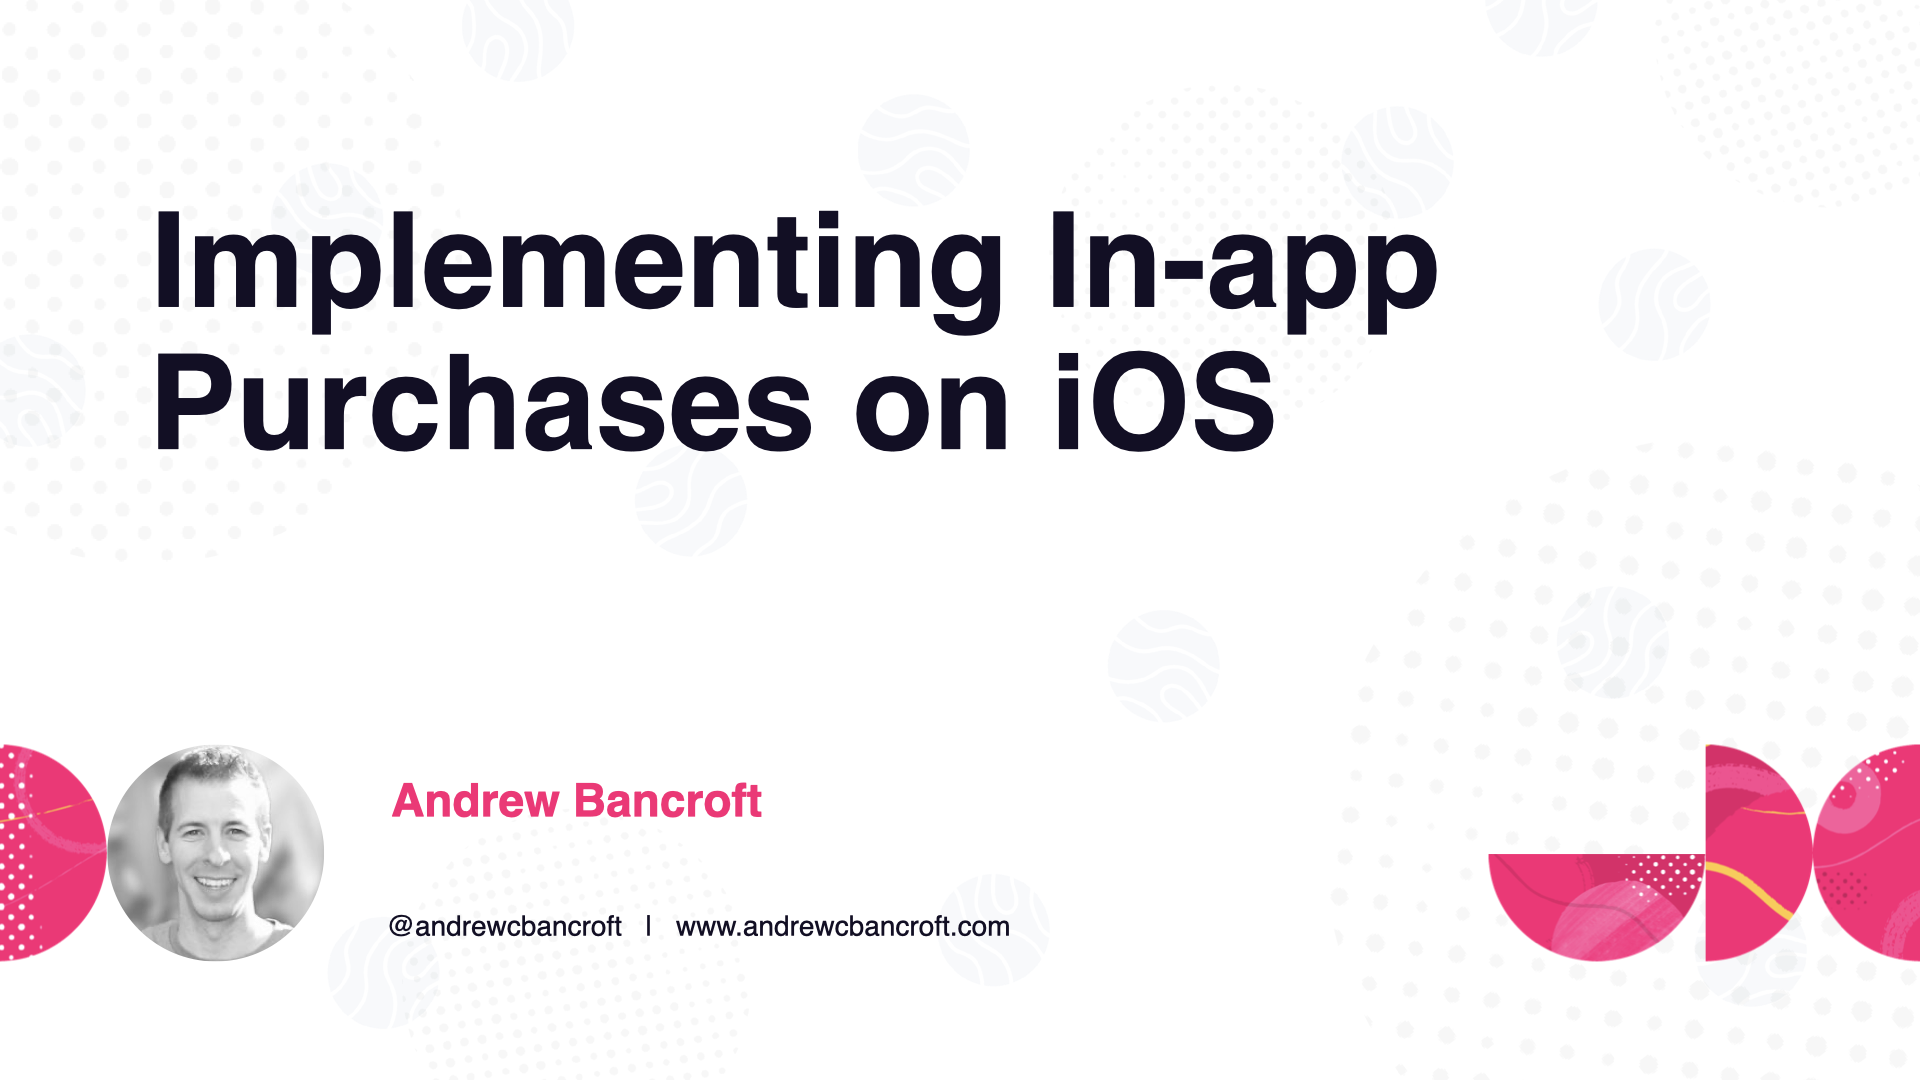 Implementing In-app Purchases on iOS